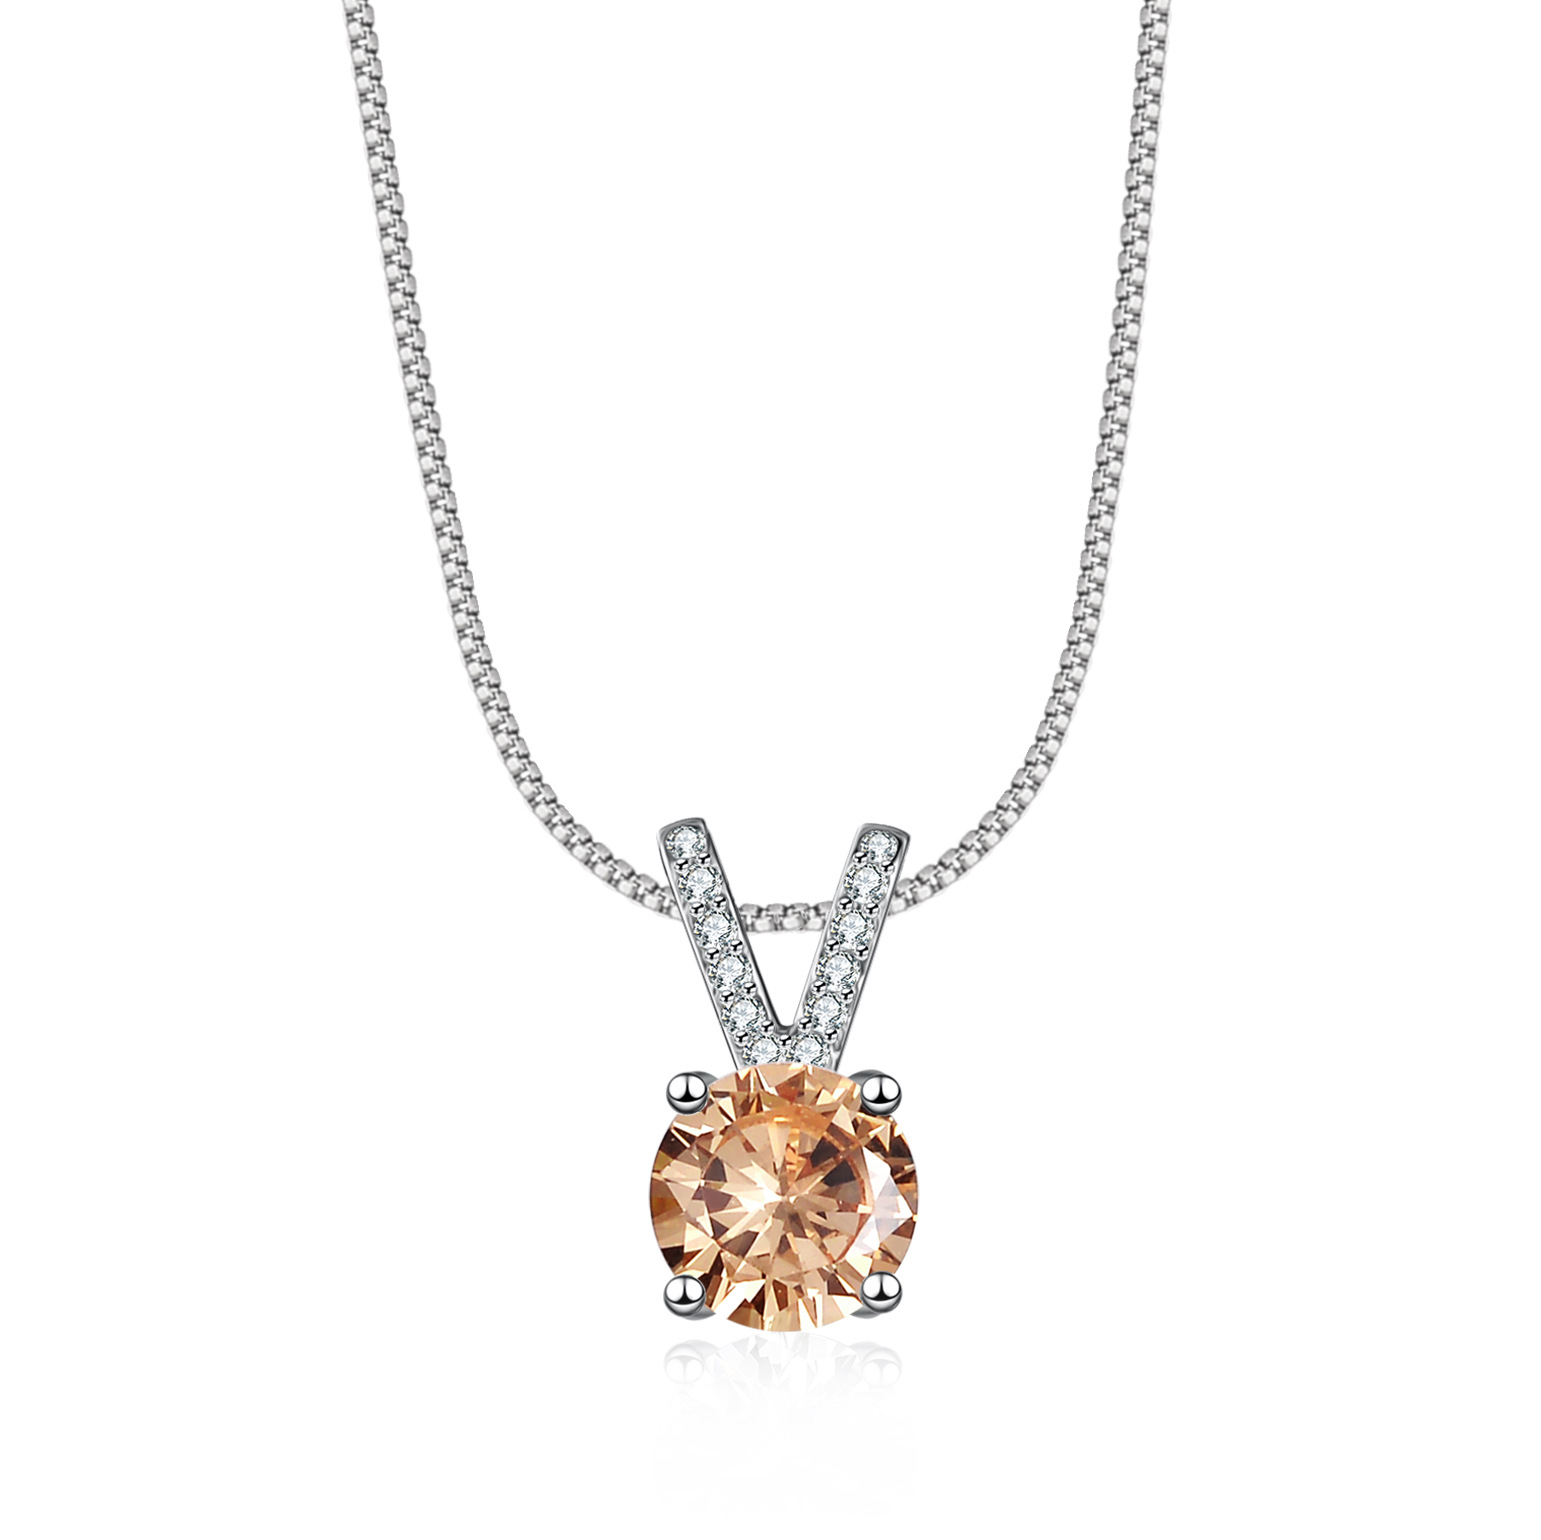 Cz Champagne Colored Gem Sterling Silver Pendant Necklace